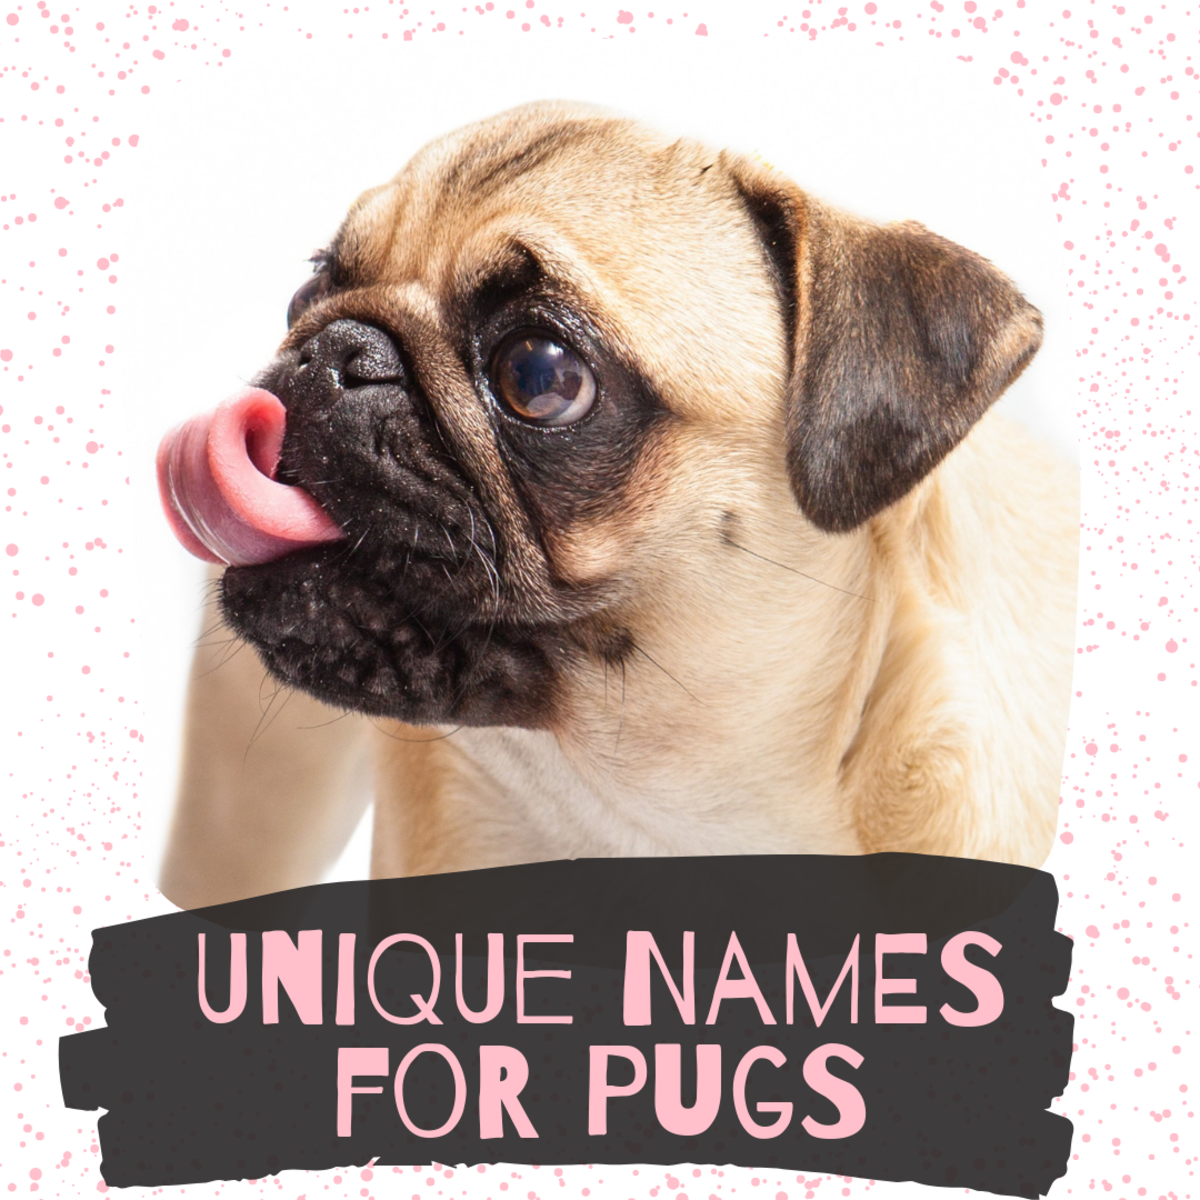 Struggling to find a great name for your new Pug puppy? Look no further!